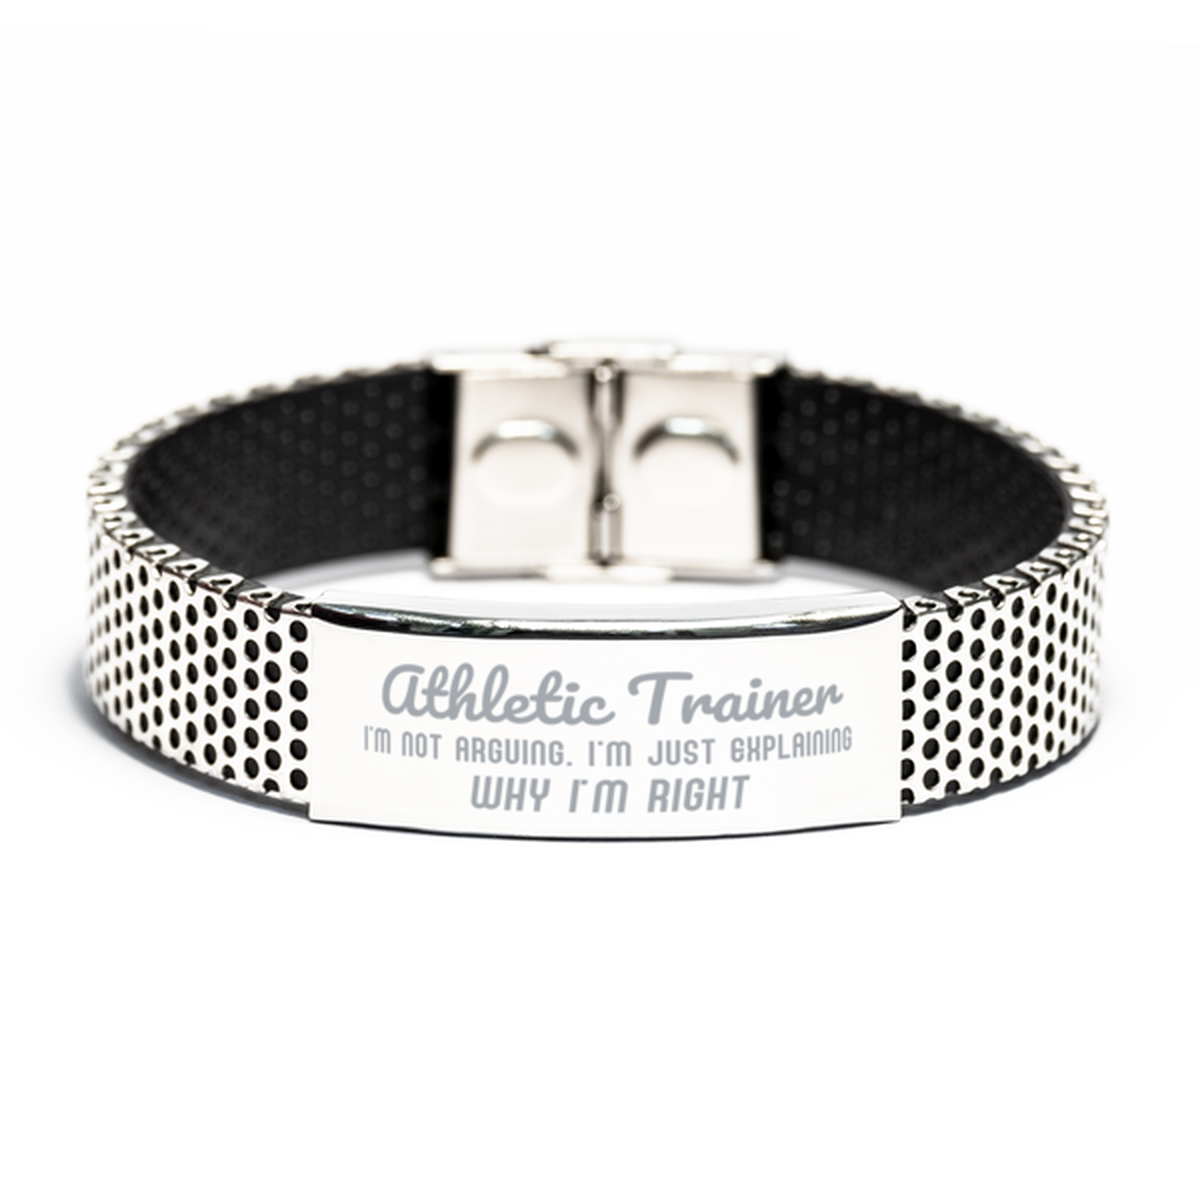 Athletic Trainer I'm not Arguing. I'm Just Explaining Why I'm RIGHT Stainless Steel Bracelet, Funny Saying Quote Athletic Trainer Gifts For Athletic Trainer Graduation Birthday Christmas Gifts for Men Women Coworker